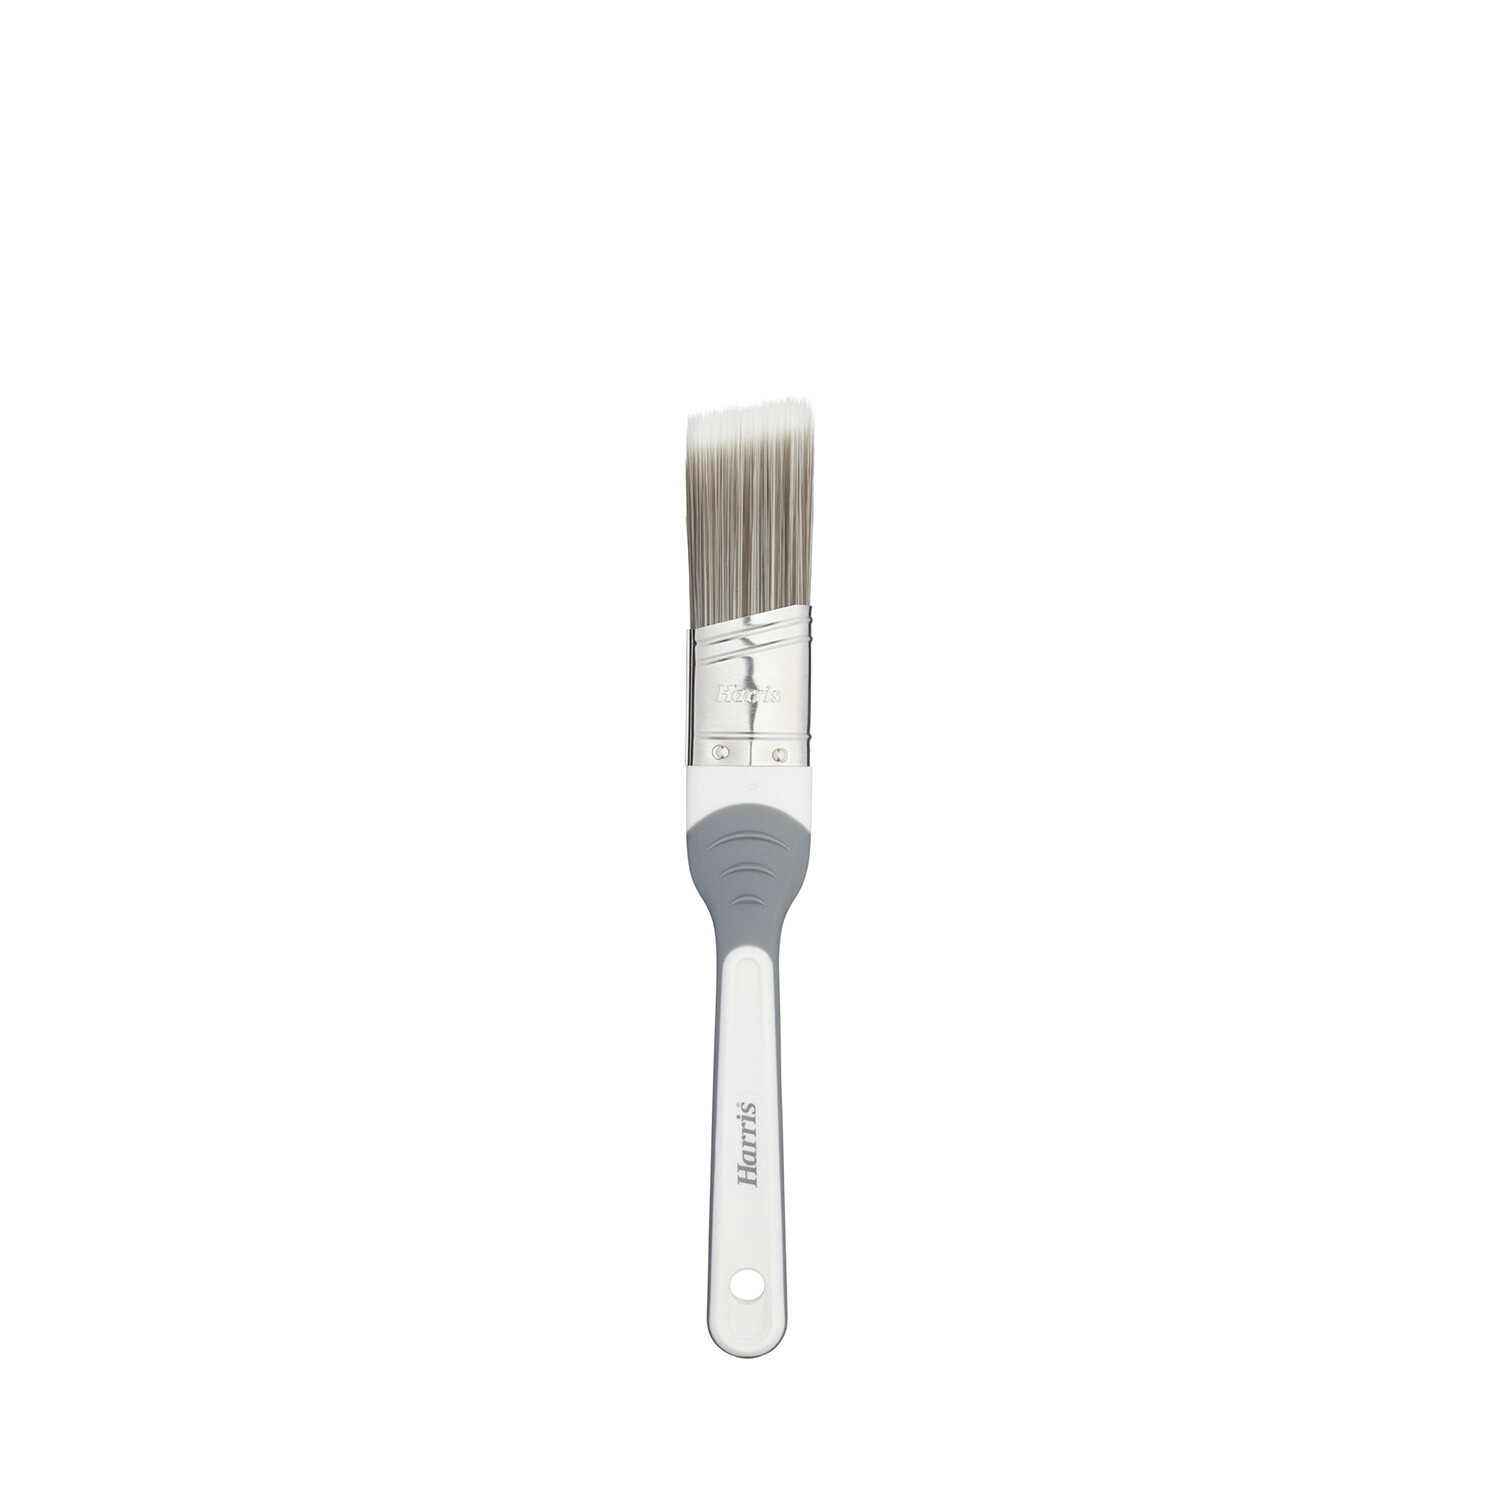 Harris 1 inch Seriously Good Walls and Ceilings Angled Brush Image 4